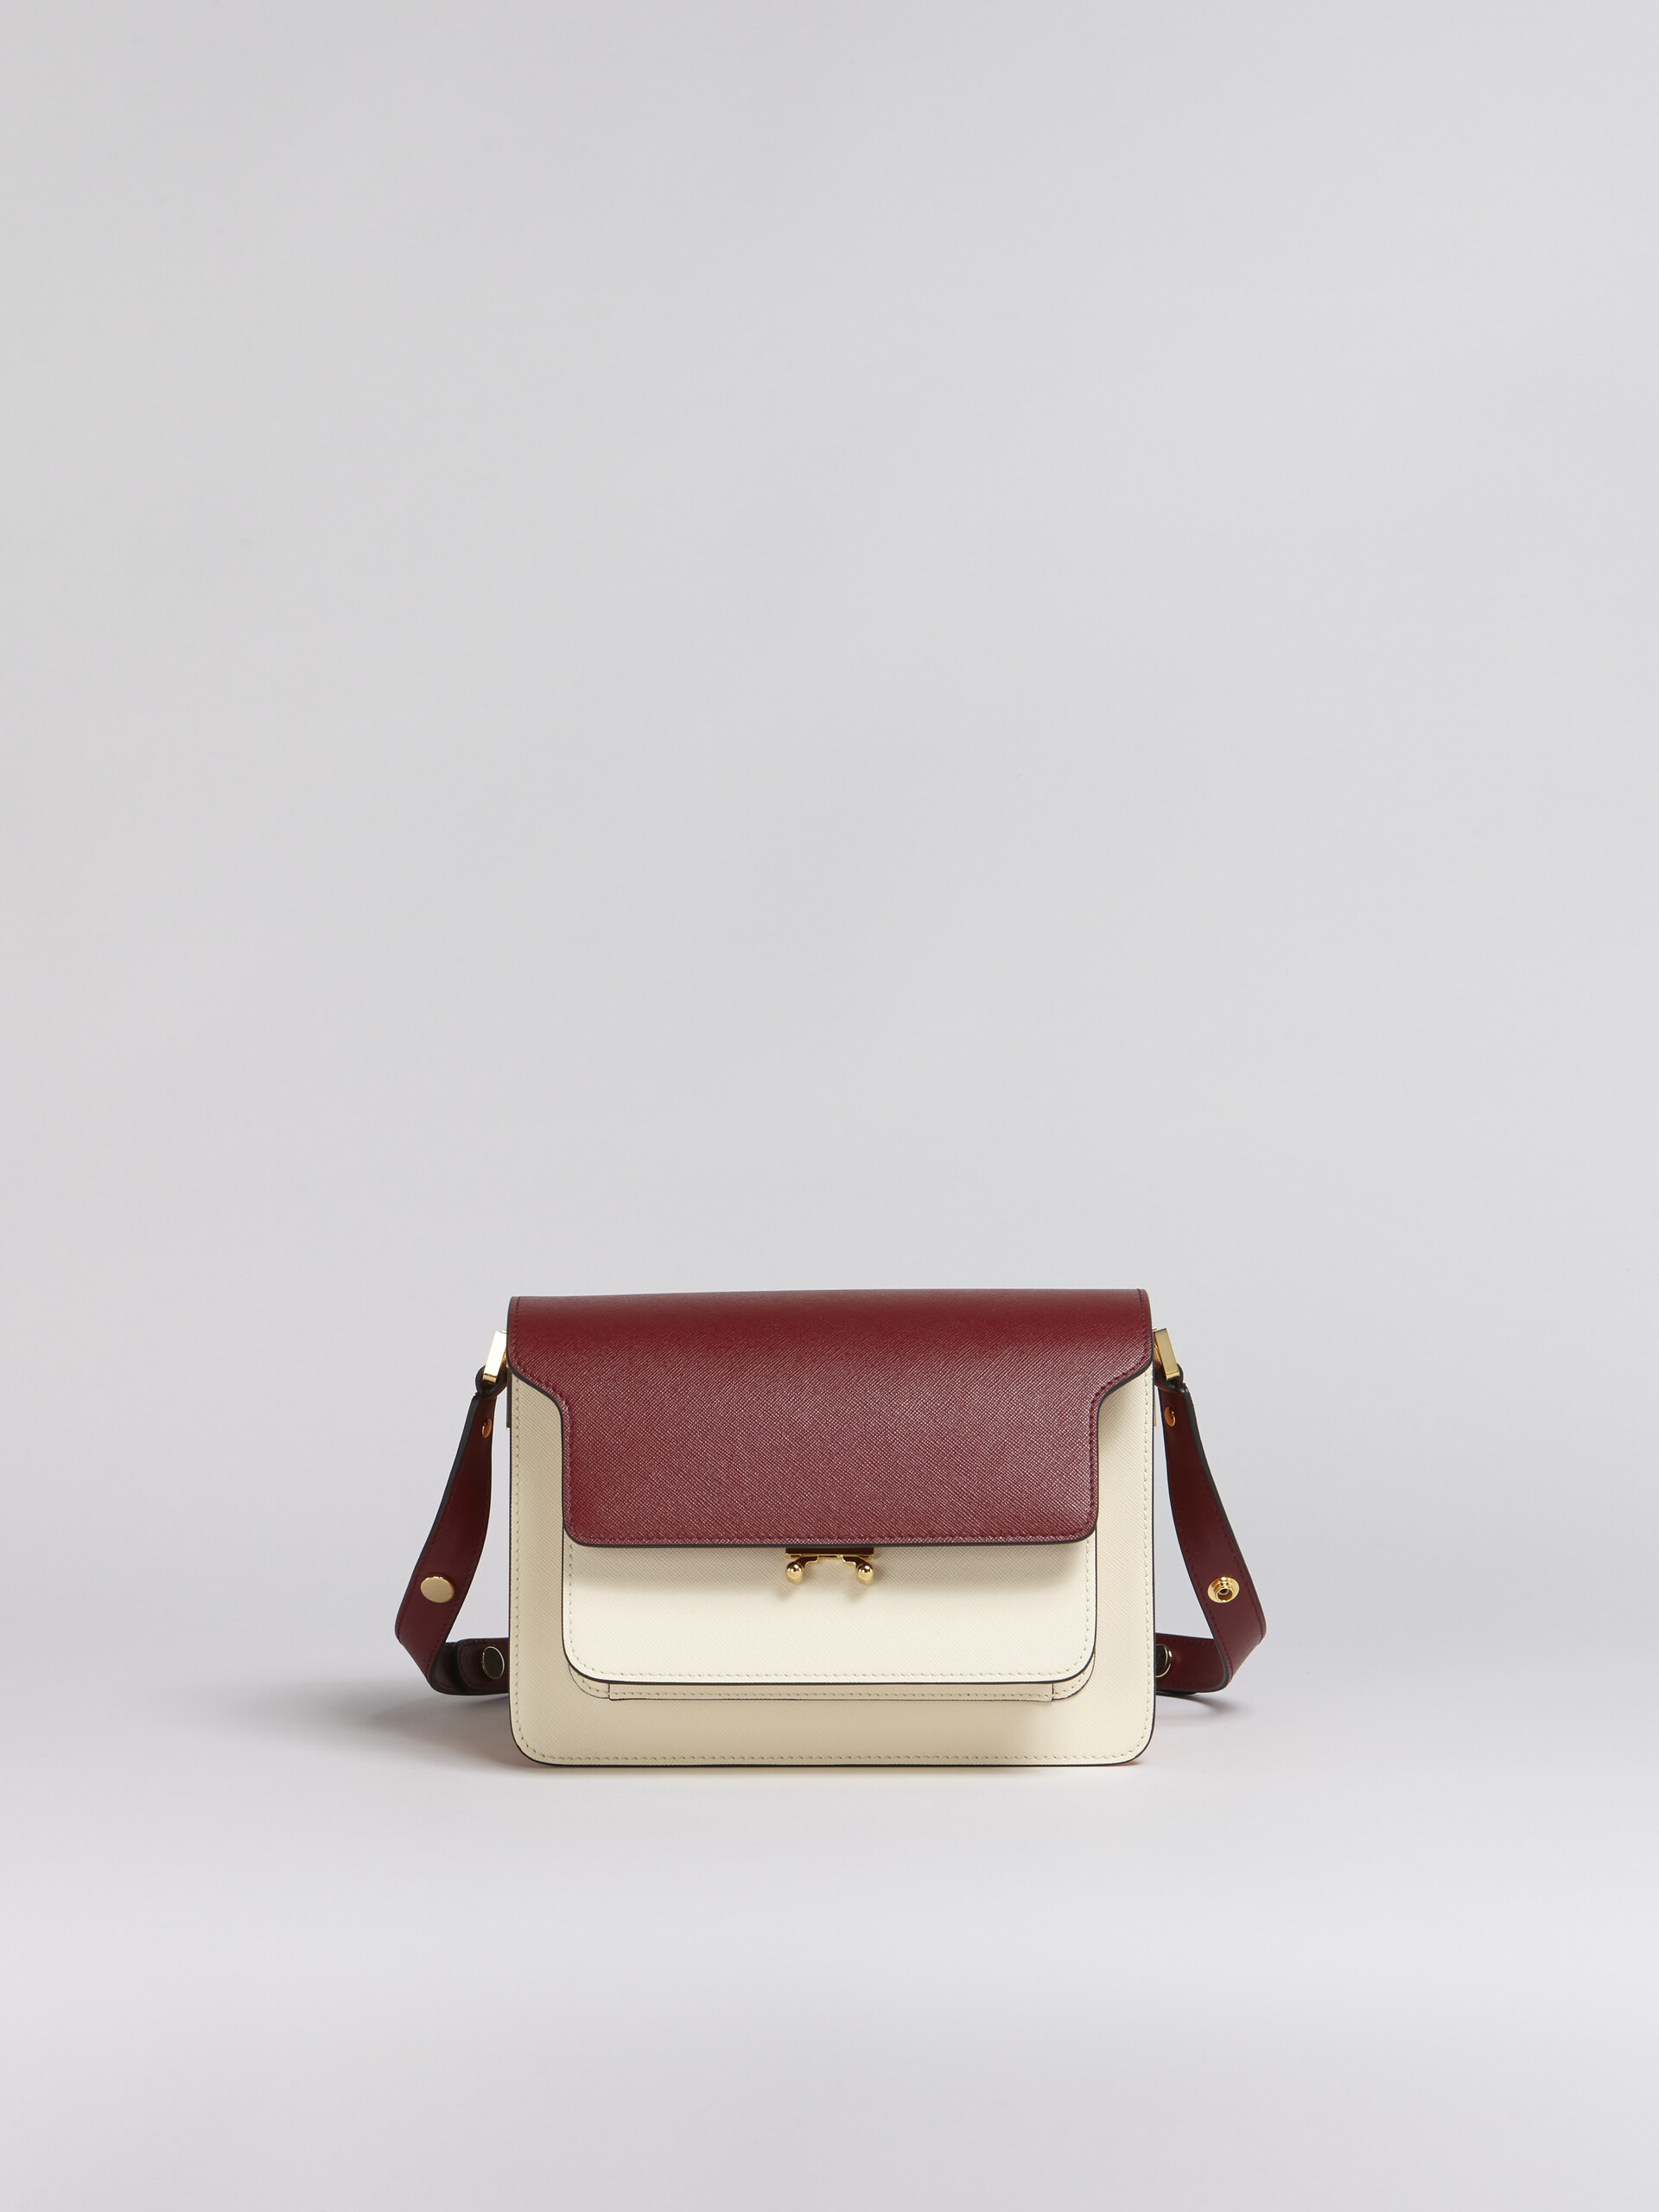 TRUNK medium bag in red white and pink saffiano leather - Shoulder Bags - Image 1